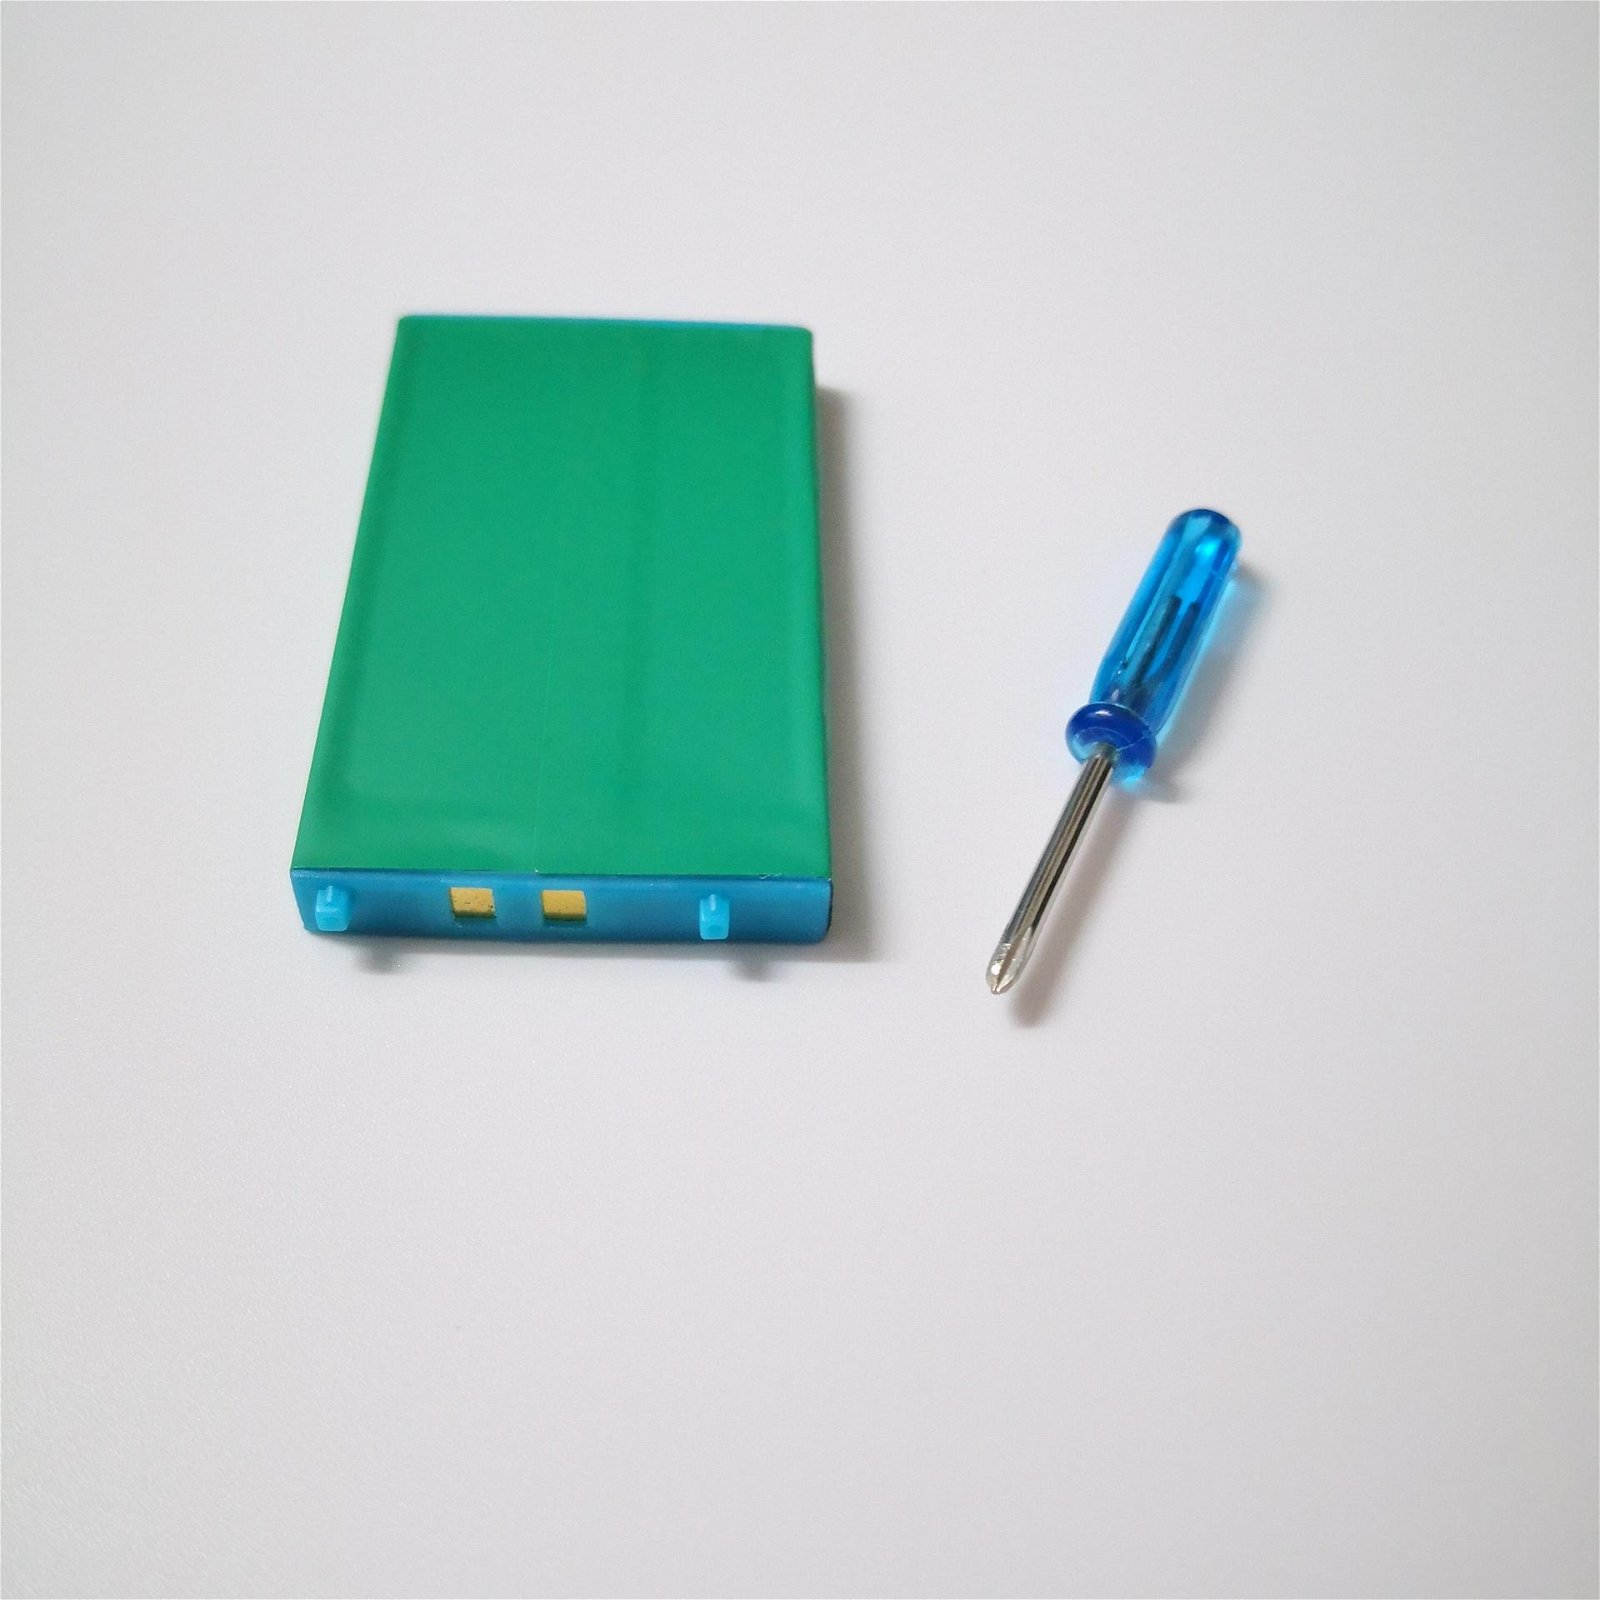 GBA SP Battery PACK with Screwdriver for GameBoy Advance High Quality 4